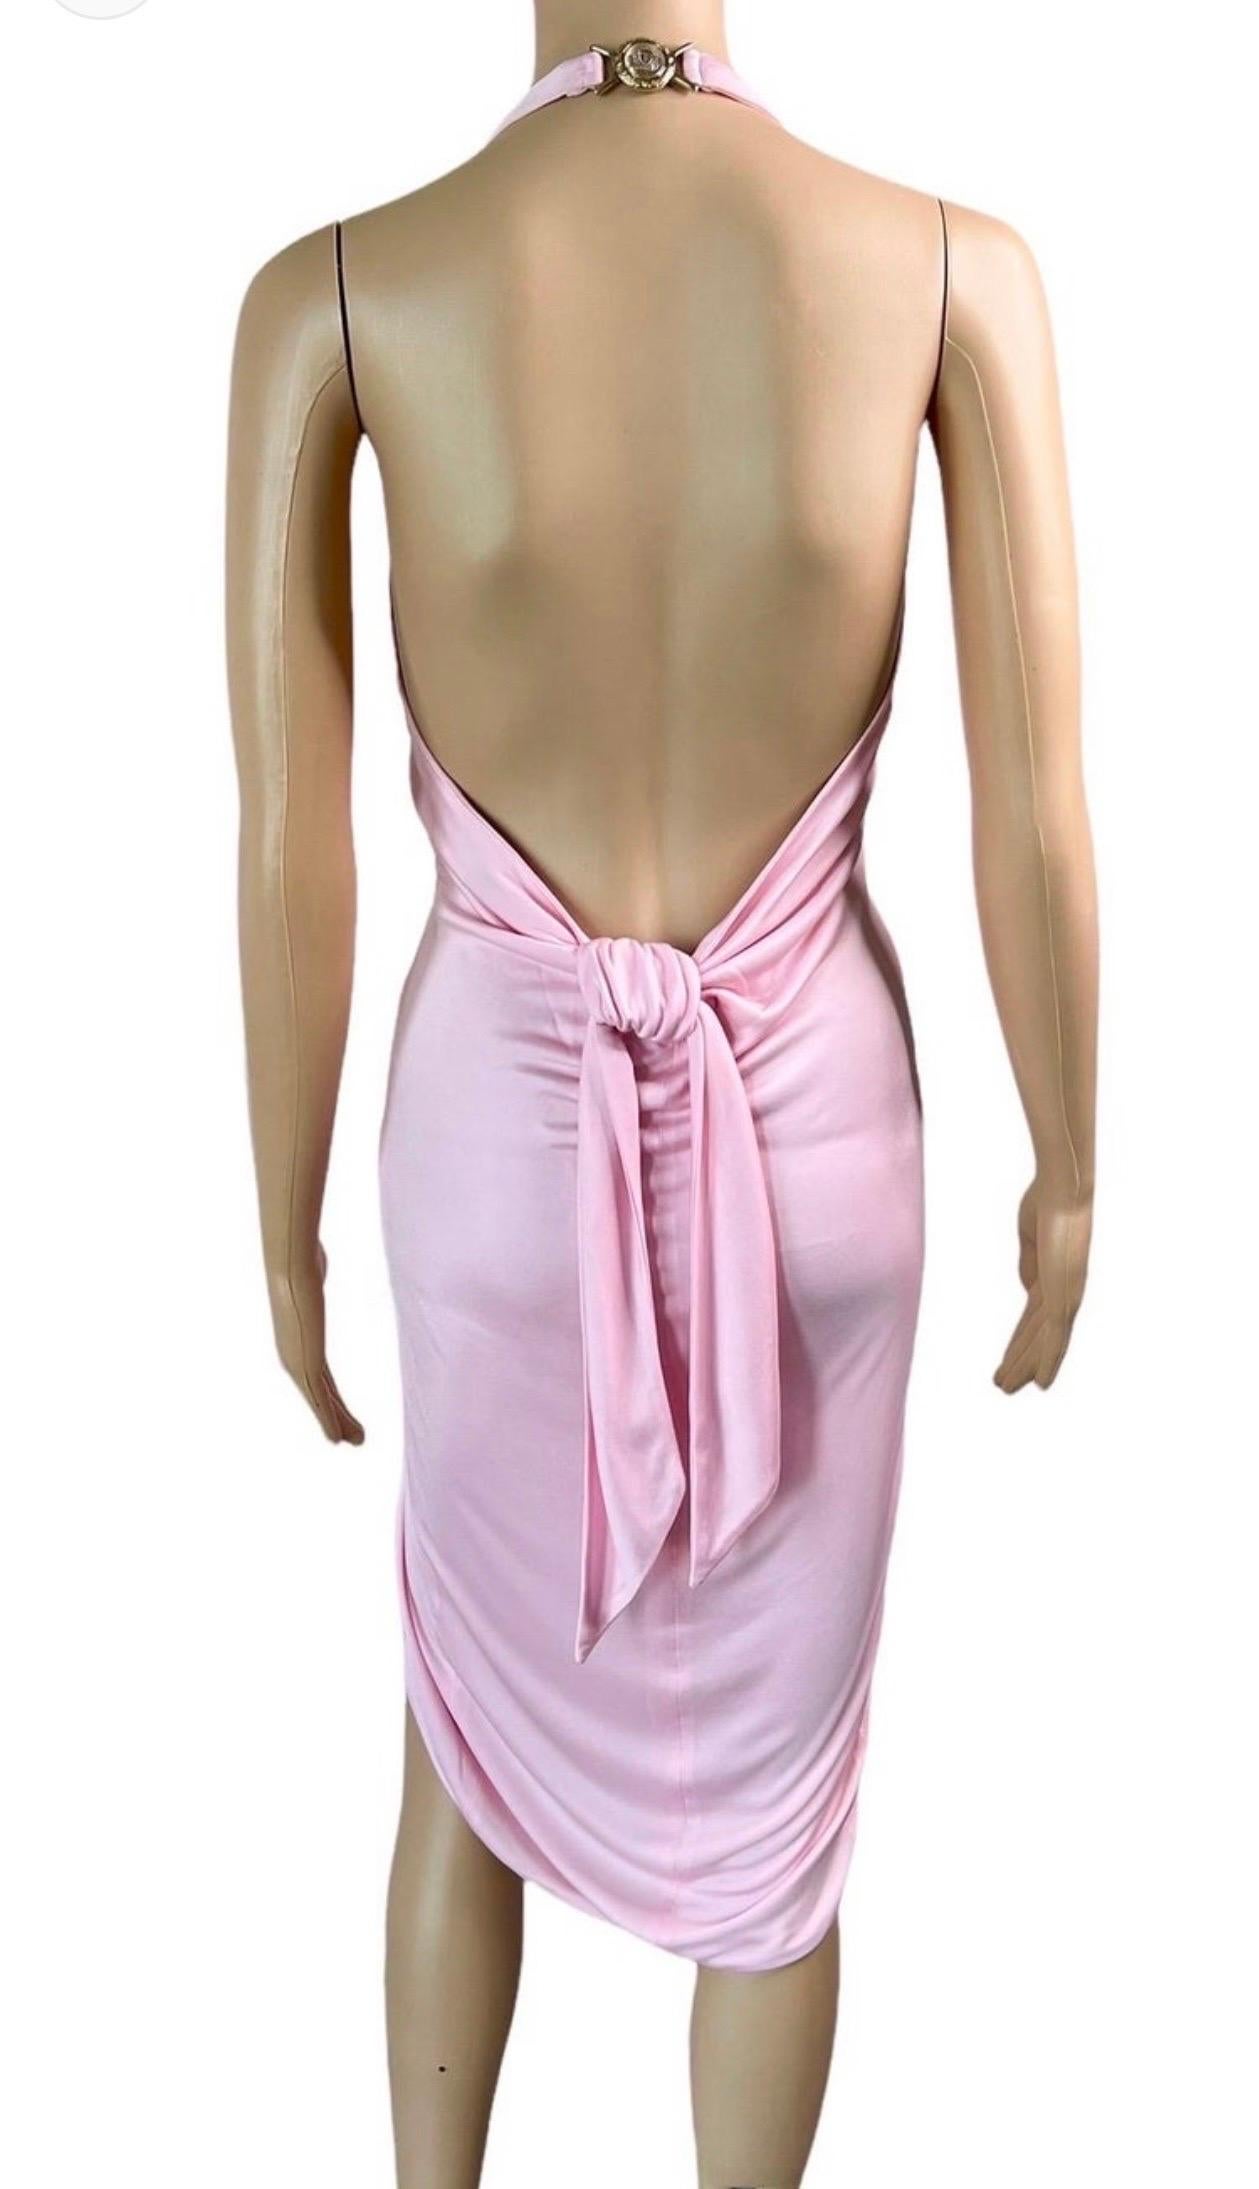 Women's or Men's Versace S/S 2005 Runway Plunging Hi-Low Ruched Open Back Pink Dress  For Sale